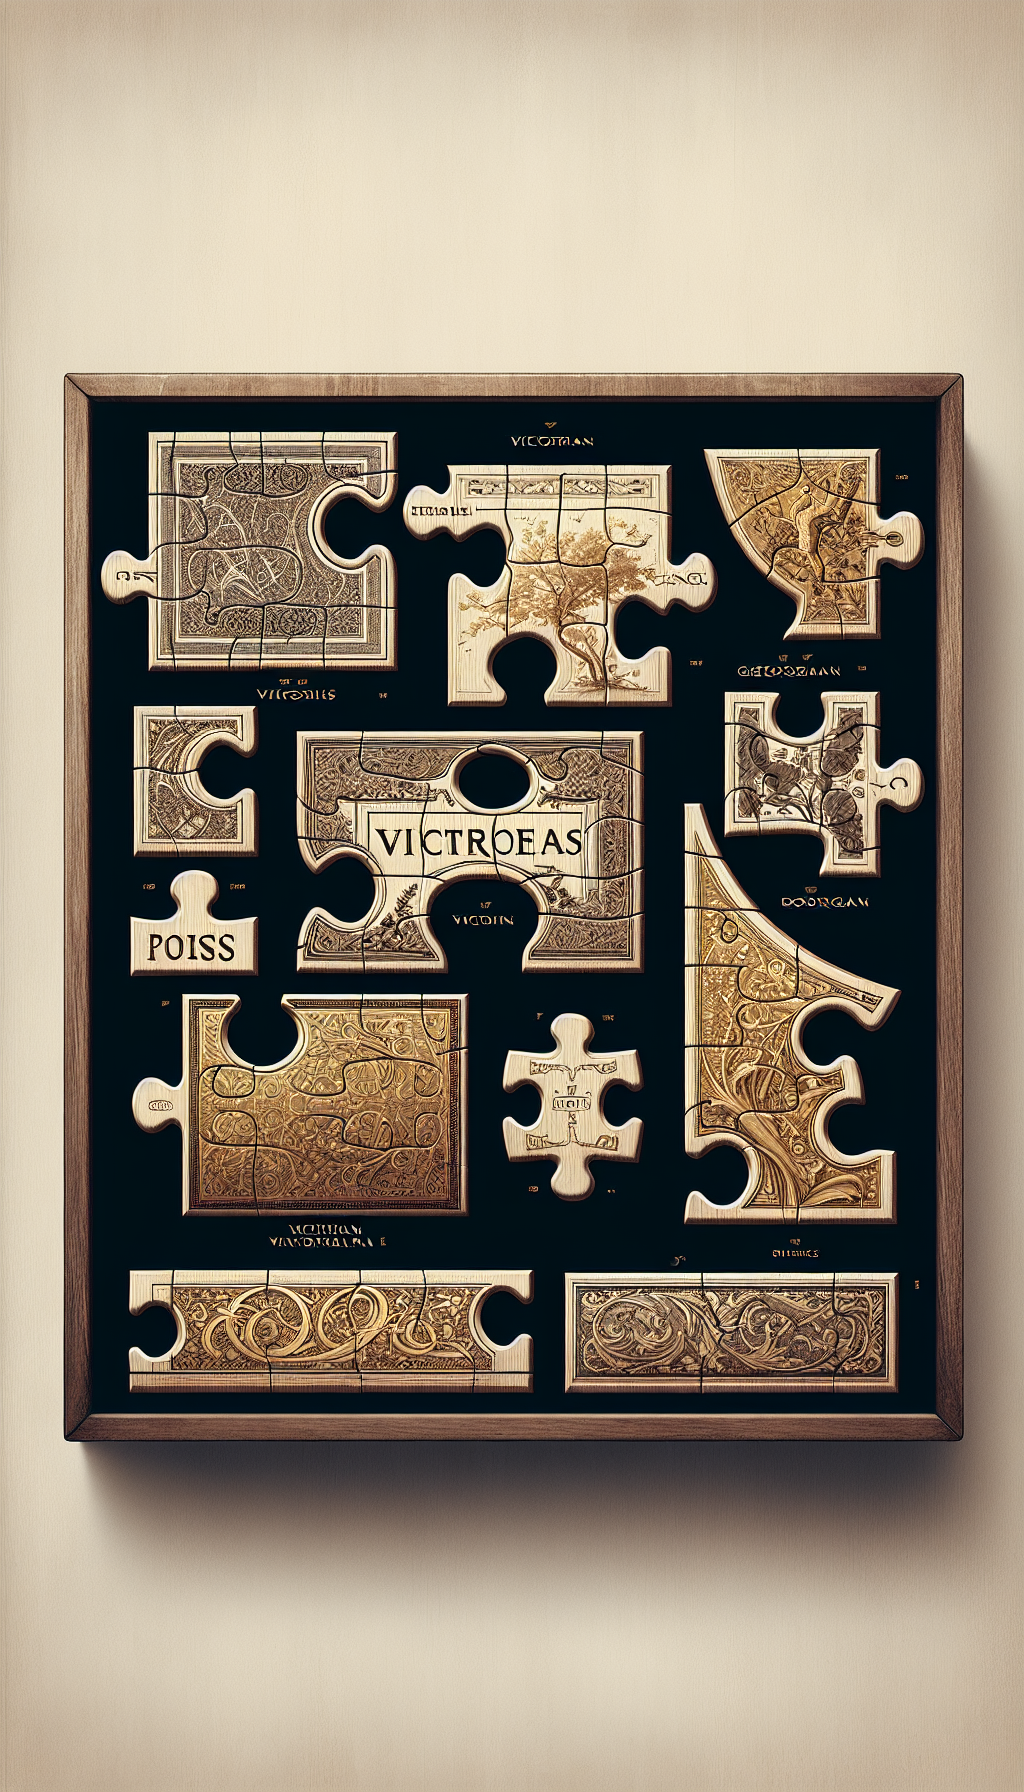 An elegant illustration depicts a half-finished antique desk puzzle, with the missing pieces floating nearby, each adorned with distinct design styles from different eras (Victorian, Georgian, Art Nouveau). Beneath the hovering pieces, golden lines trace to text labels indicating the era, while the completed segments subtly transition in wood grain and patina, symbolizing the increasing value with historical accuracy and age.